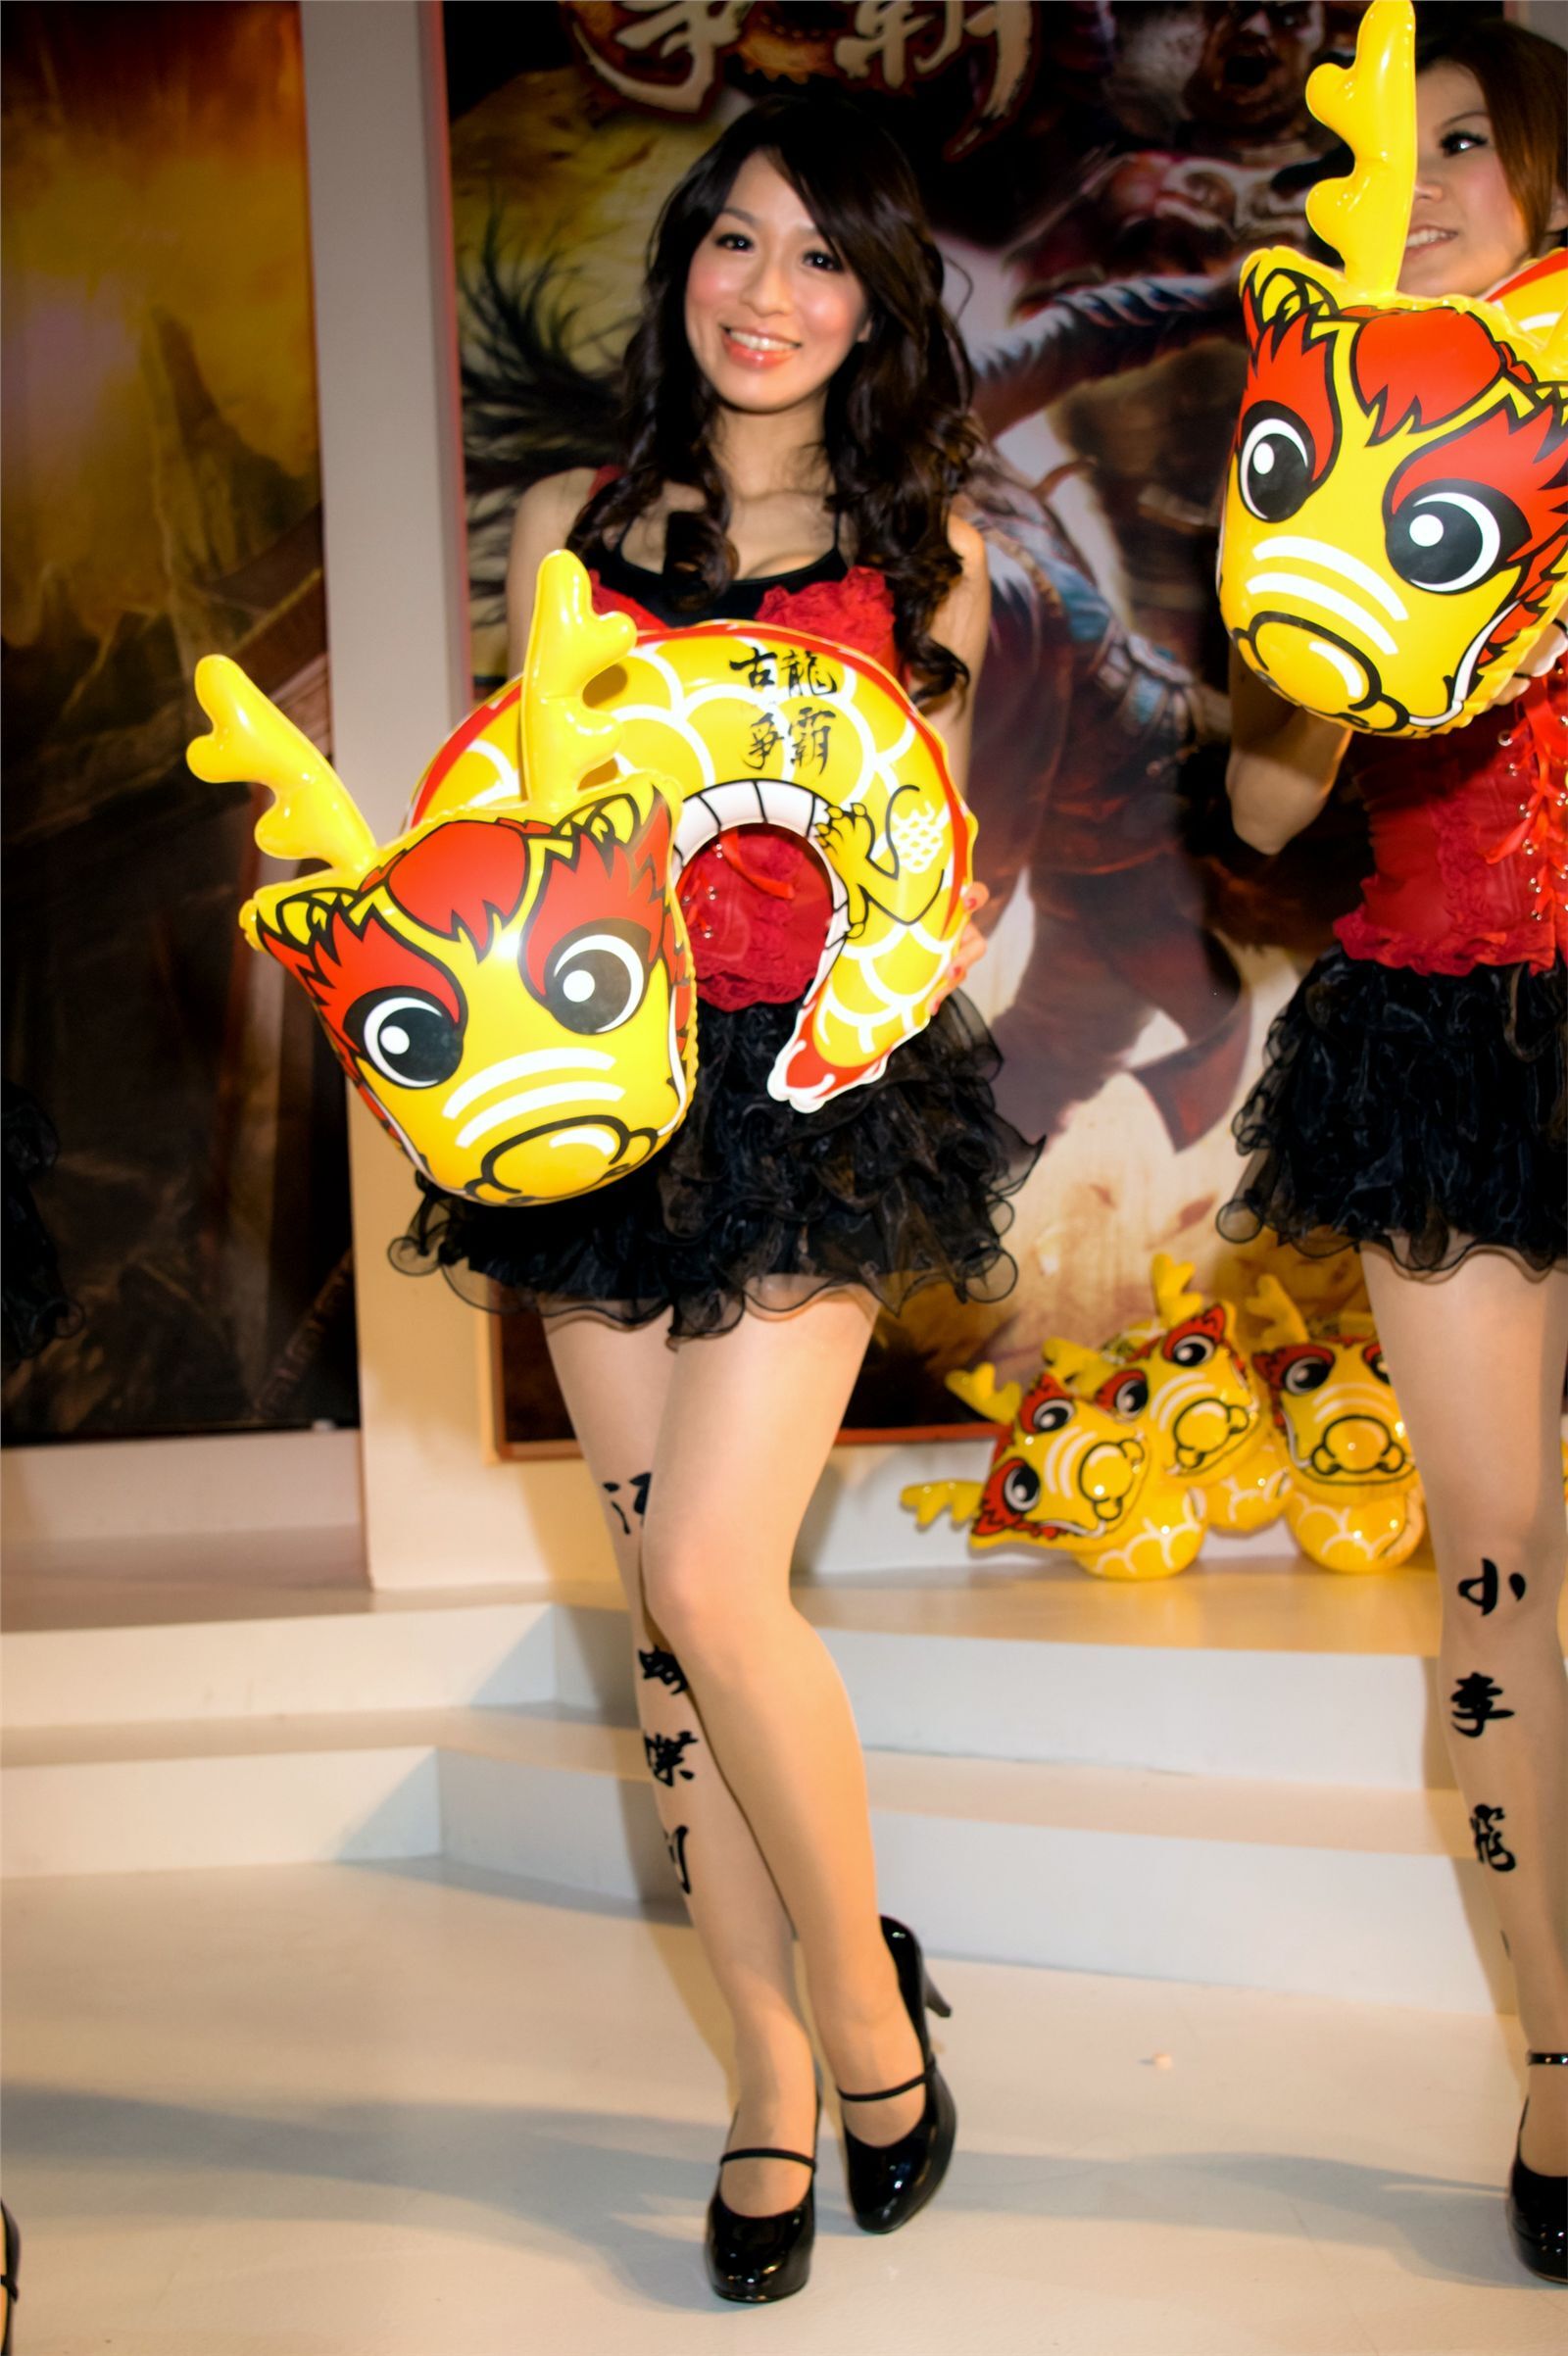 [exhibition] photo set of domestic beauty models at Taipei 2012 spring video game show